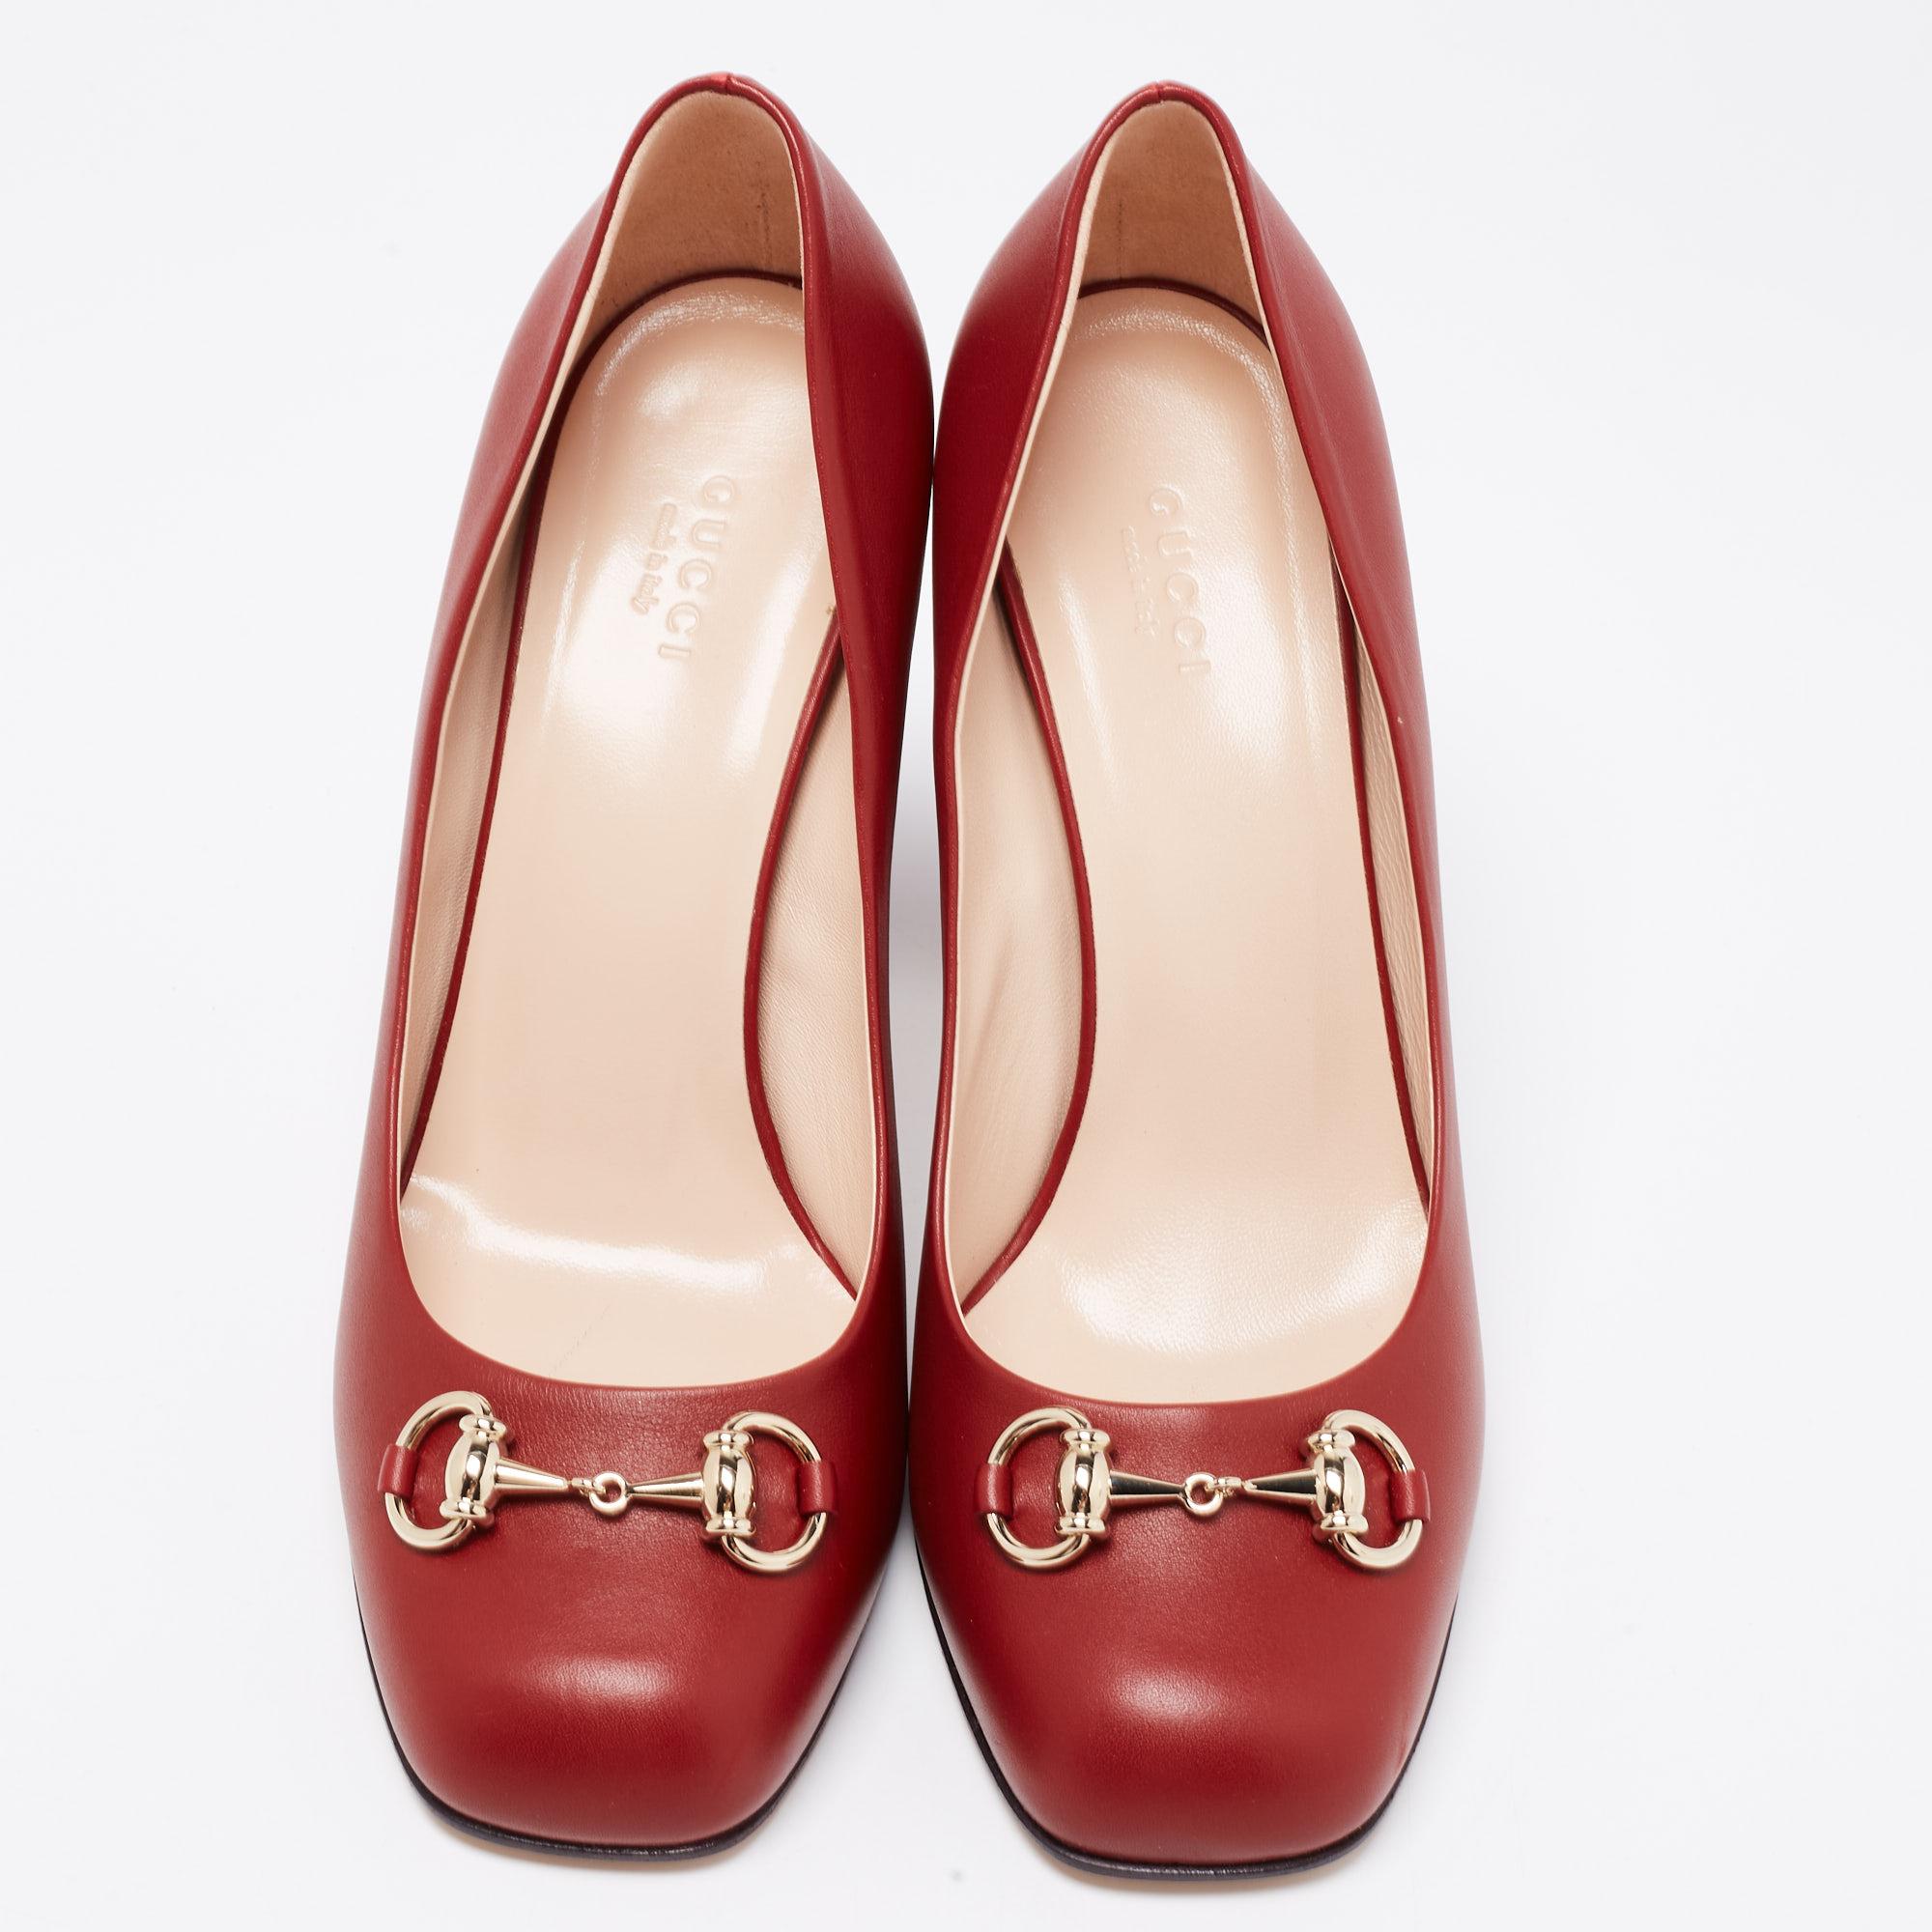 Gucci's pumps are a classy and chic creation that is impossible to resist! From formal outfits to casual attires, these pumps are perfect to wear. These pumps are fashioned in rust-red leather and highlighted with a gold-tone Horsebit motif on the